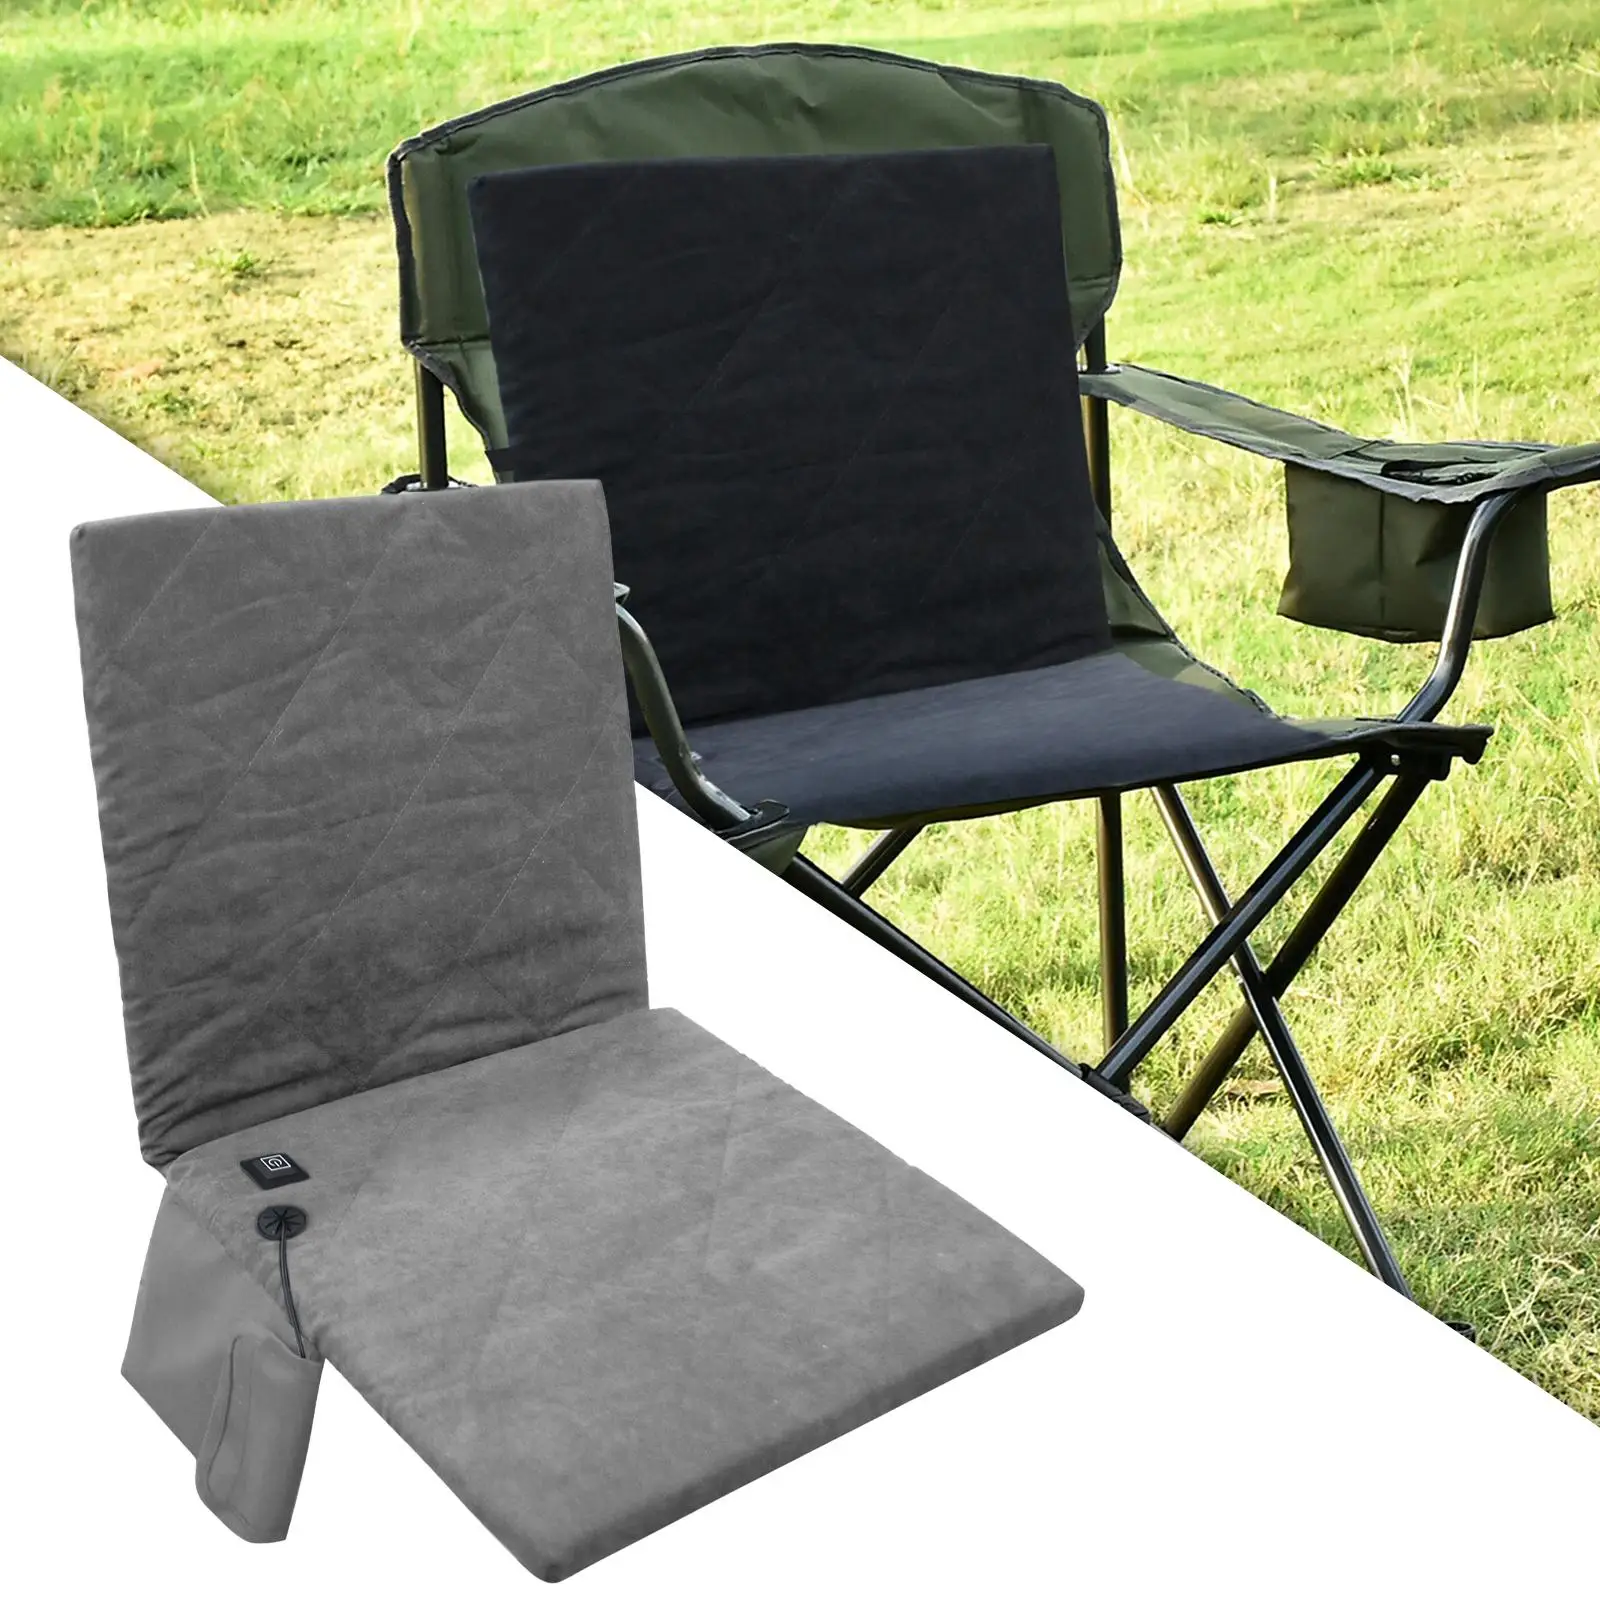 Seat Cushion Heated Warming Portable Temperature for Home Office Chair Heating Seat Pad for Fishing Lawn BBQ